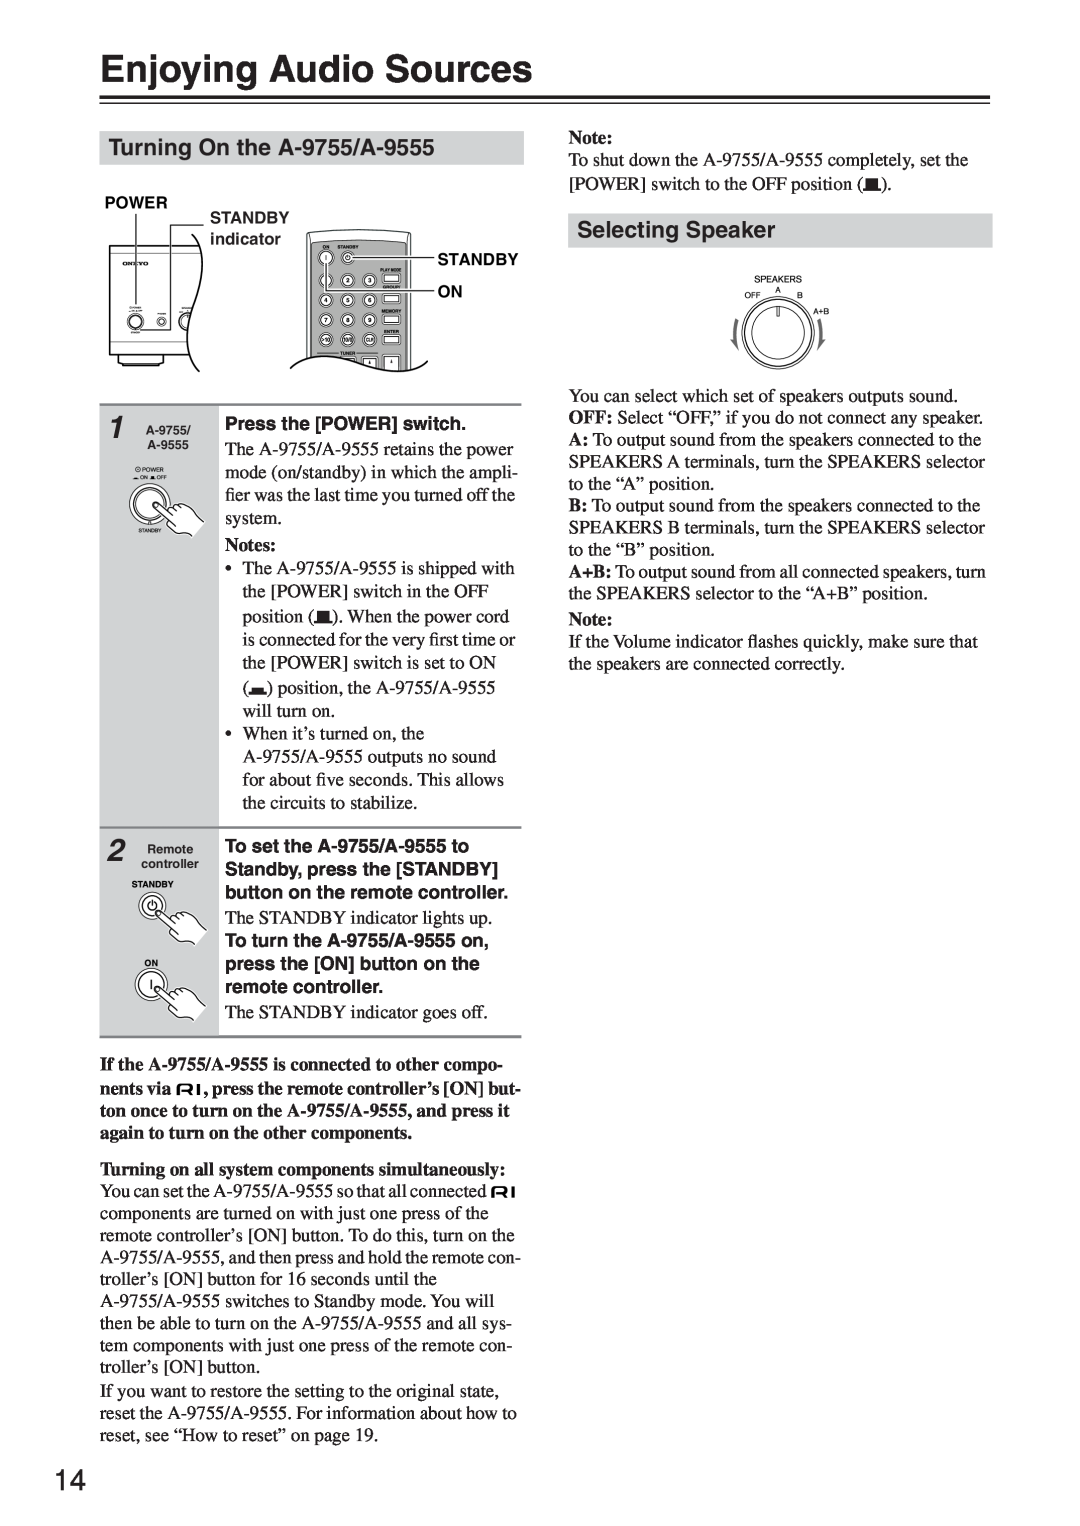 Onkyo instruction manual Enjoying Audio Sources, Turning On the A-9755/A-9555, Selecting Speaker 